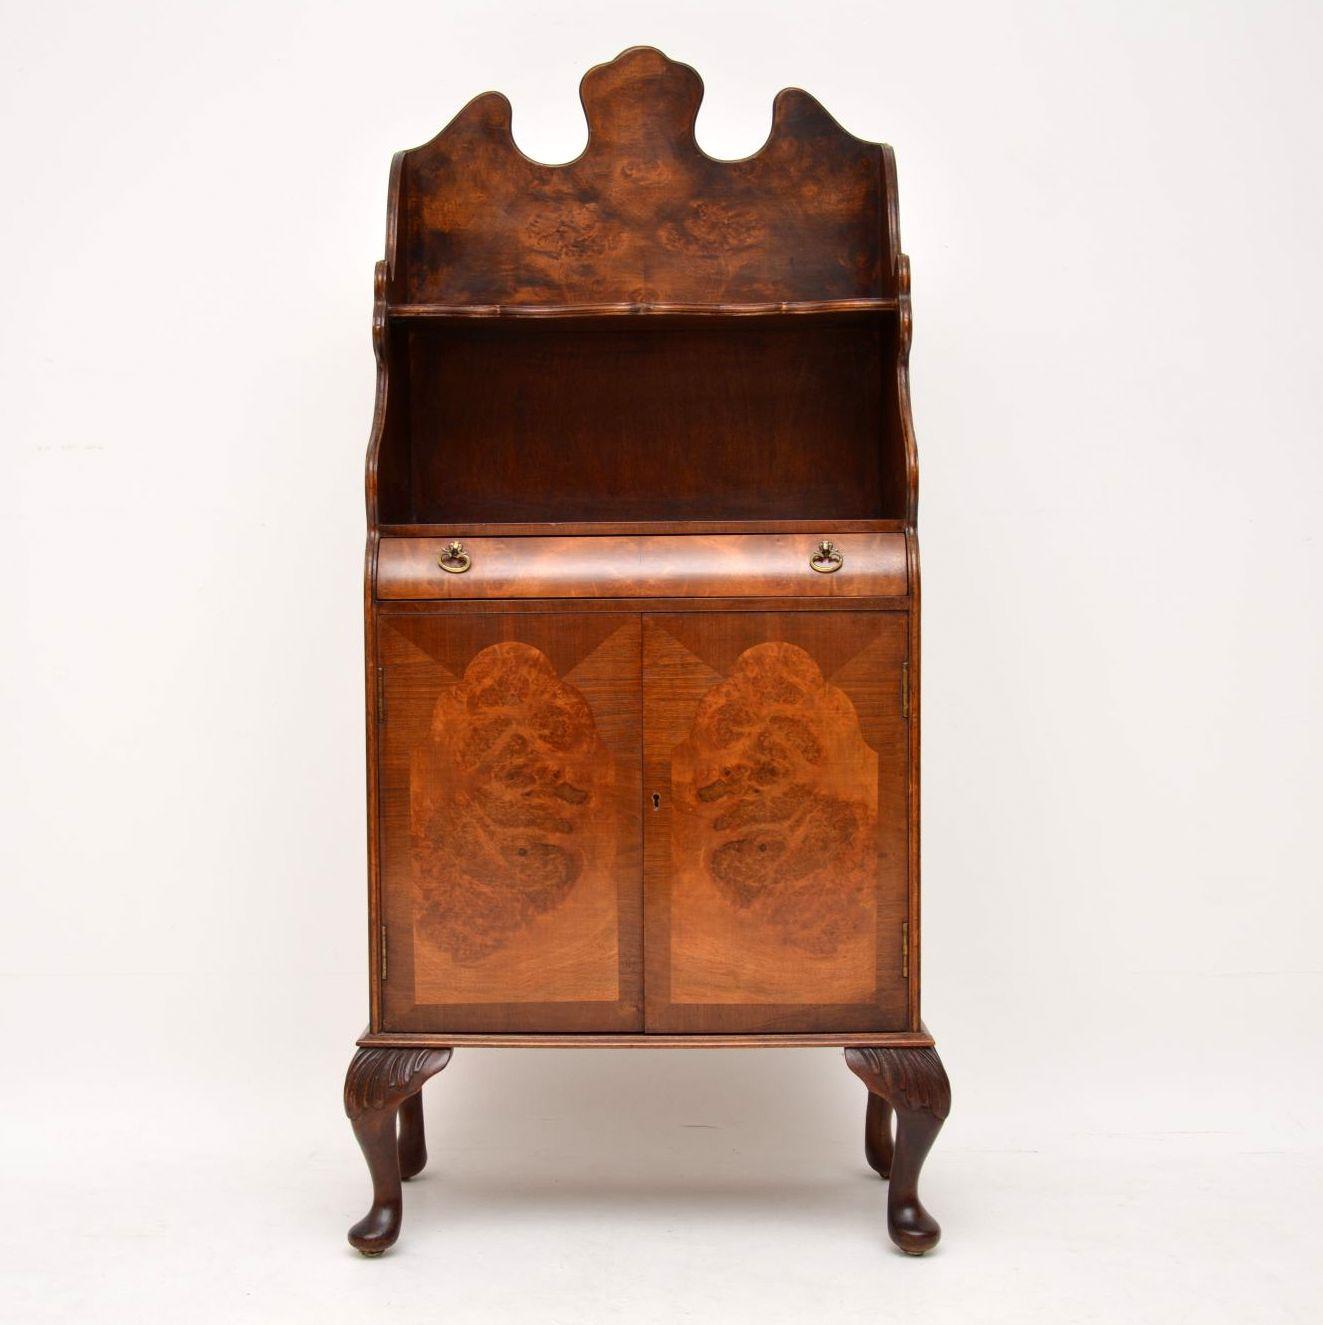 Antique burr walnut cabinet with bookshelves above the cupboards.

This is a very useful piece of furniture, which could fit in many locations in the home.

The top & the sides are beautifully shaped out & it sits on carved feet. It has a curved